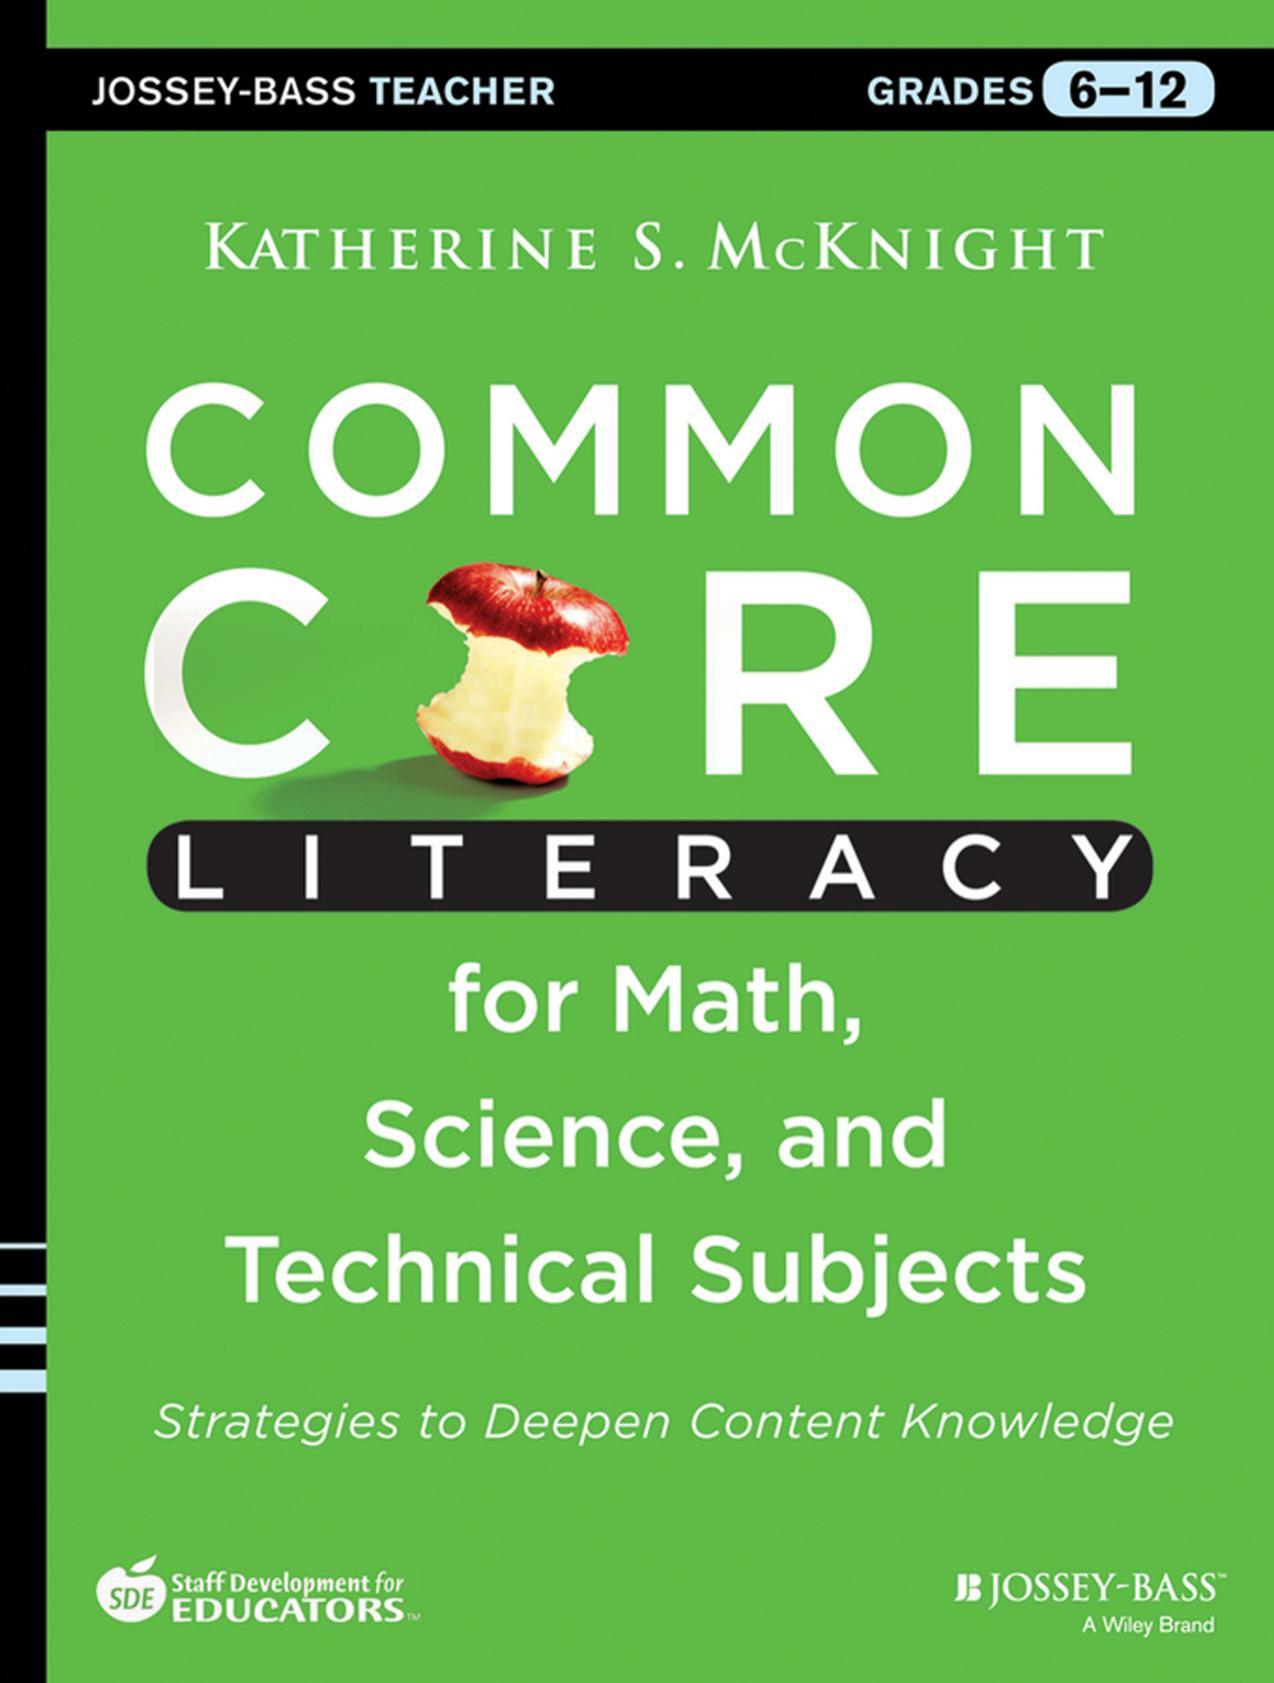 Common Core Literacy for Math, Science, and Technical Subjects : Strategies to Deepen Content Knowledge (Grades 6-12) by Katherine S. McKnight